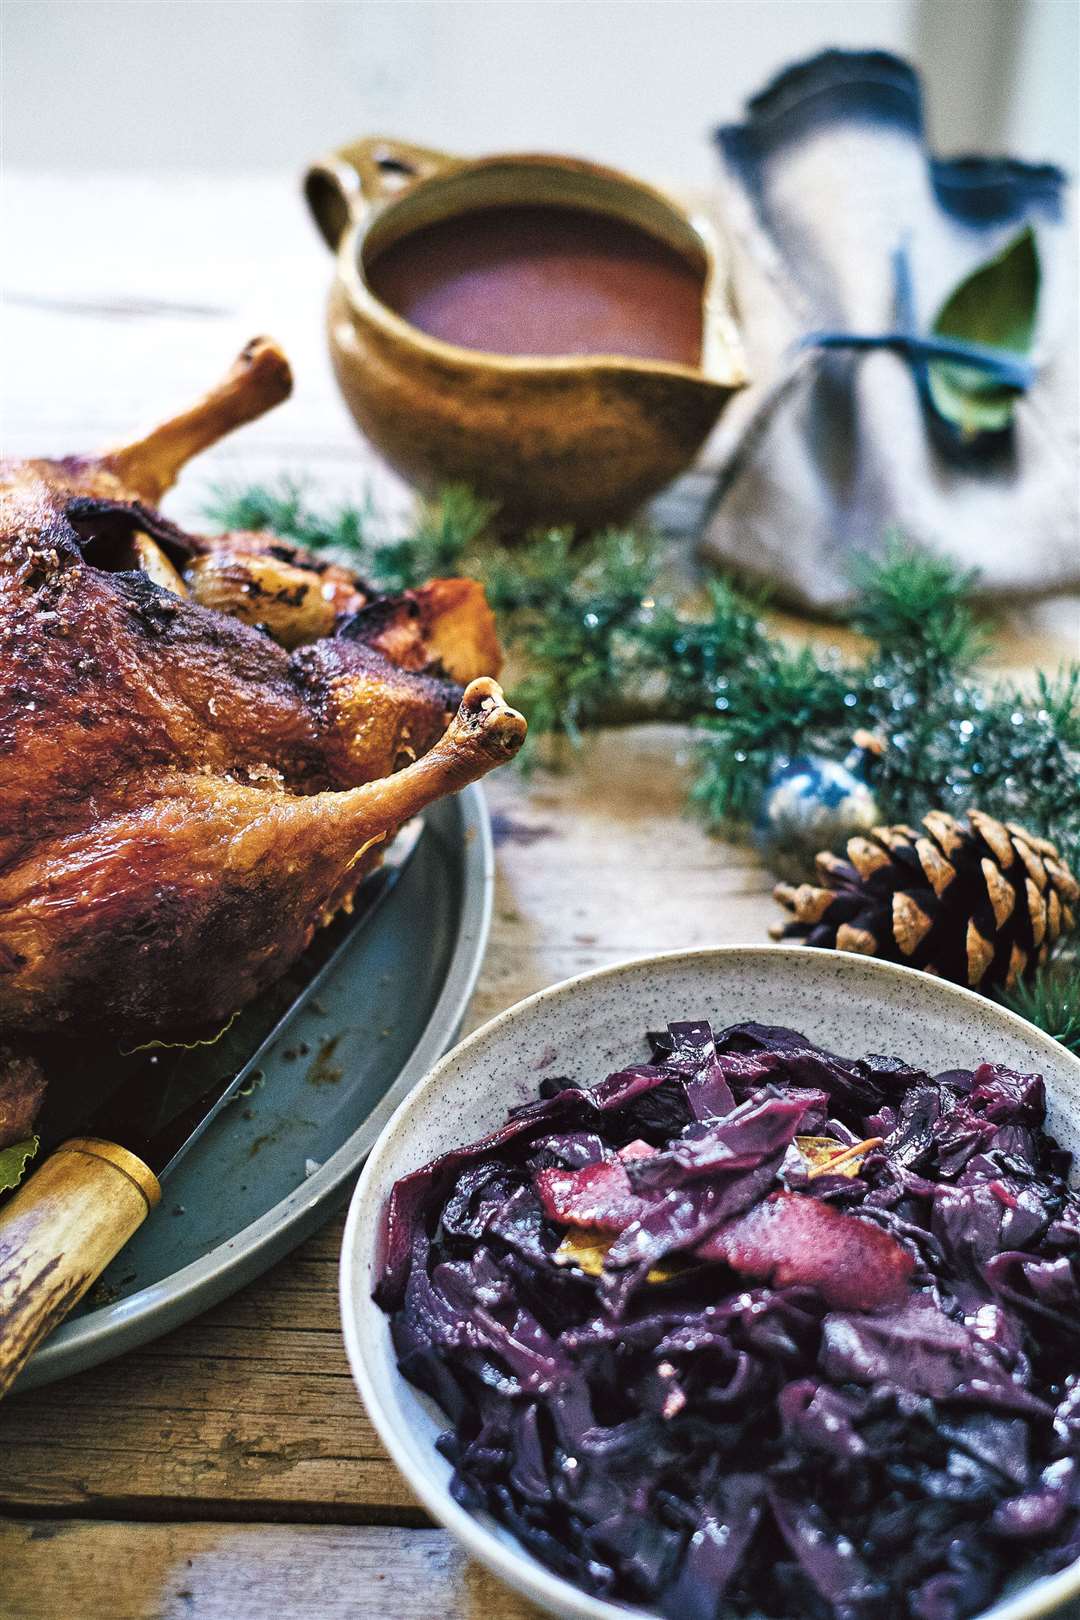 Juleand slow-roast duck. Picture: Christine Rudolph/PA